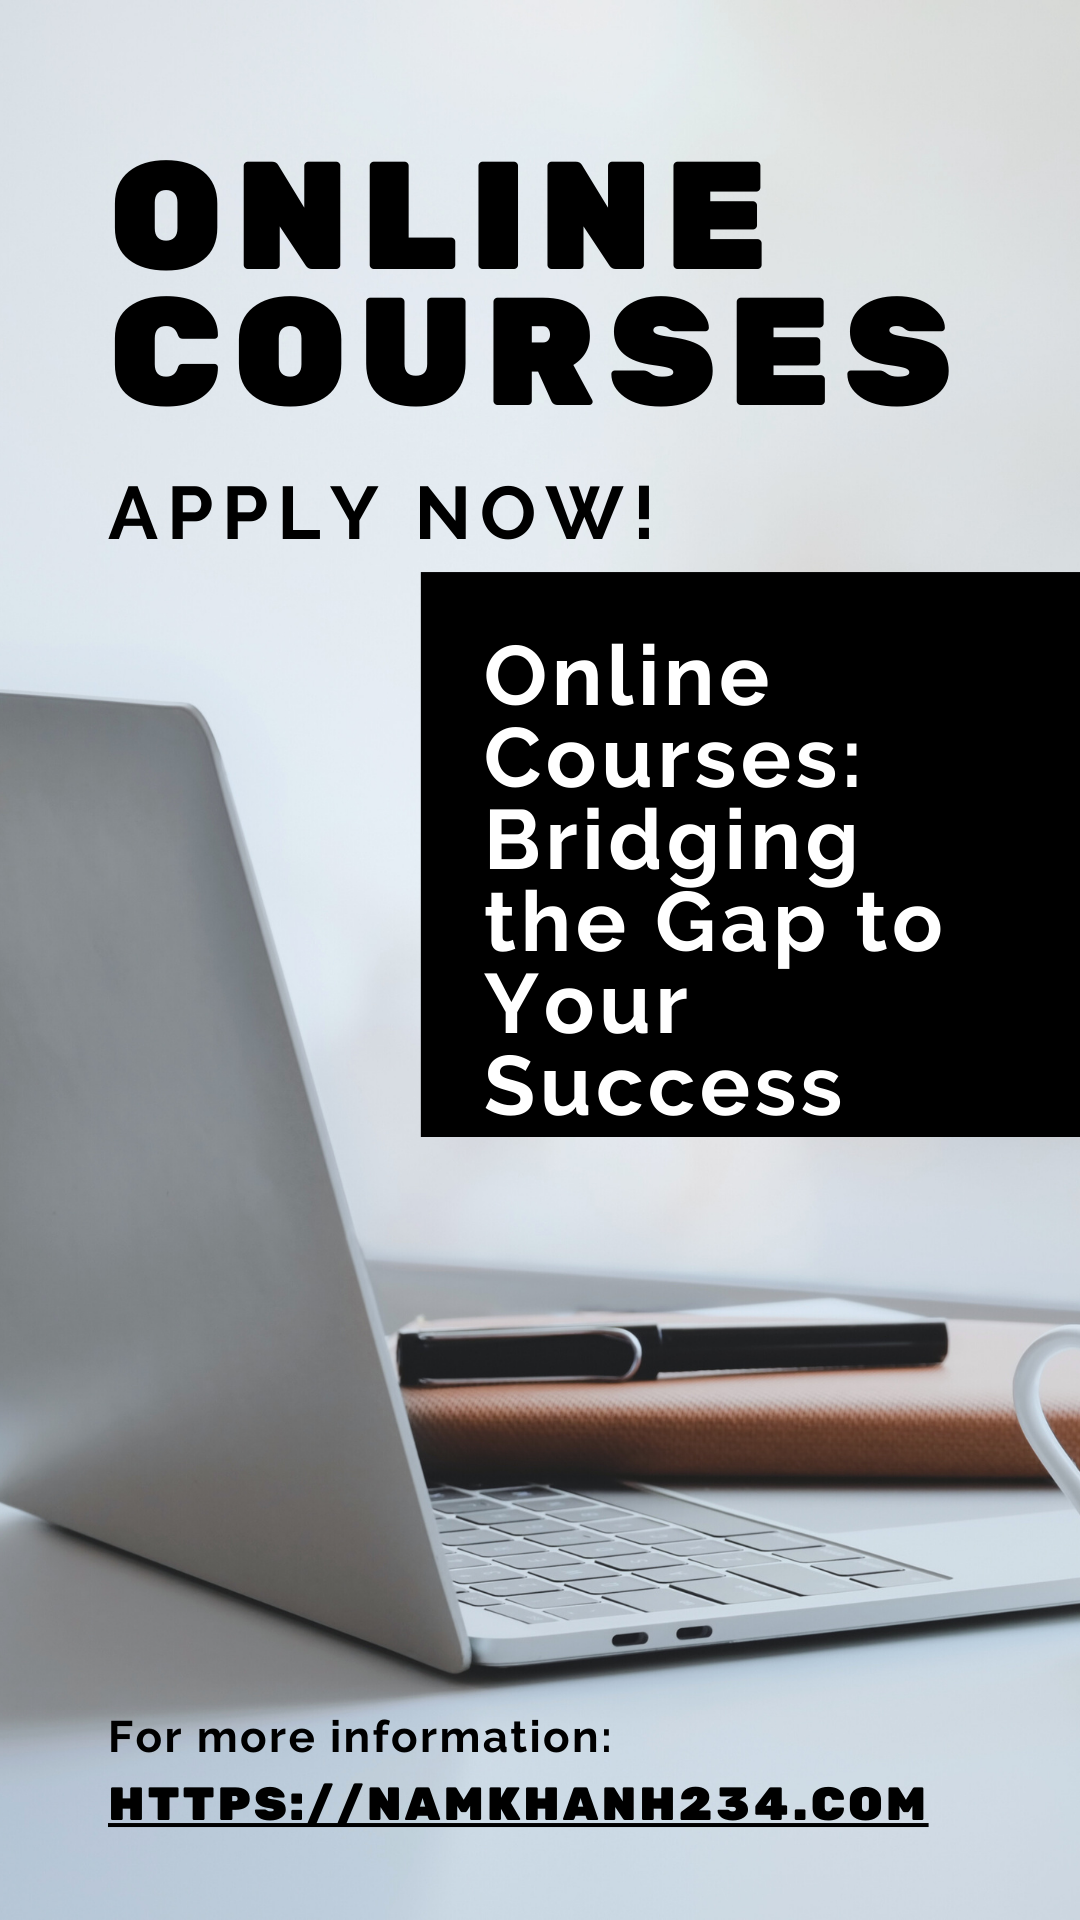 Online Courses: Bridging the Gap to Your Success